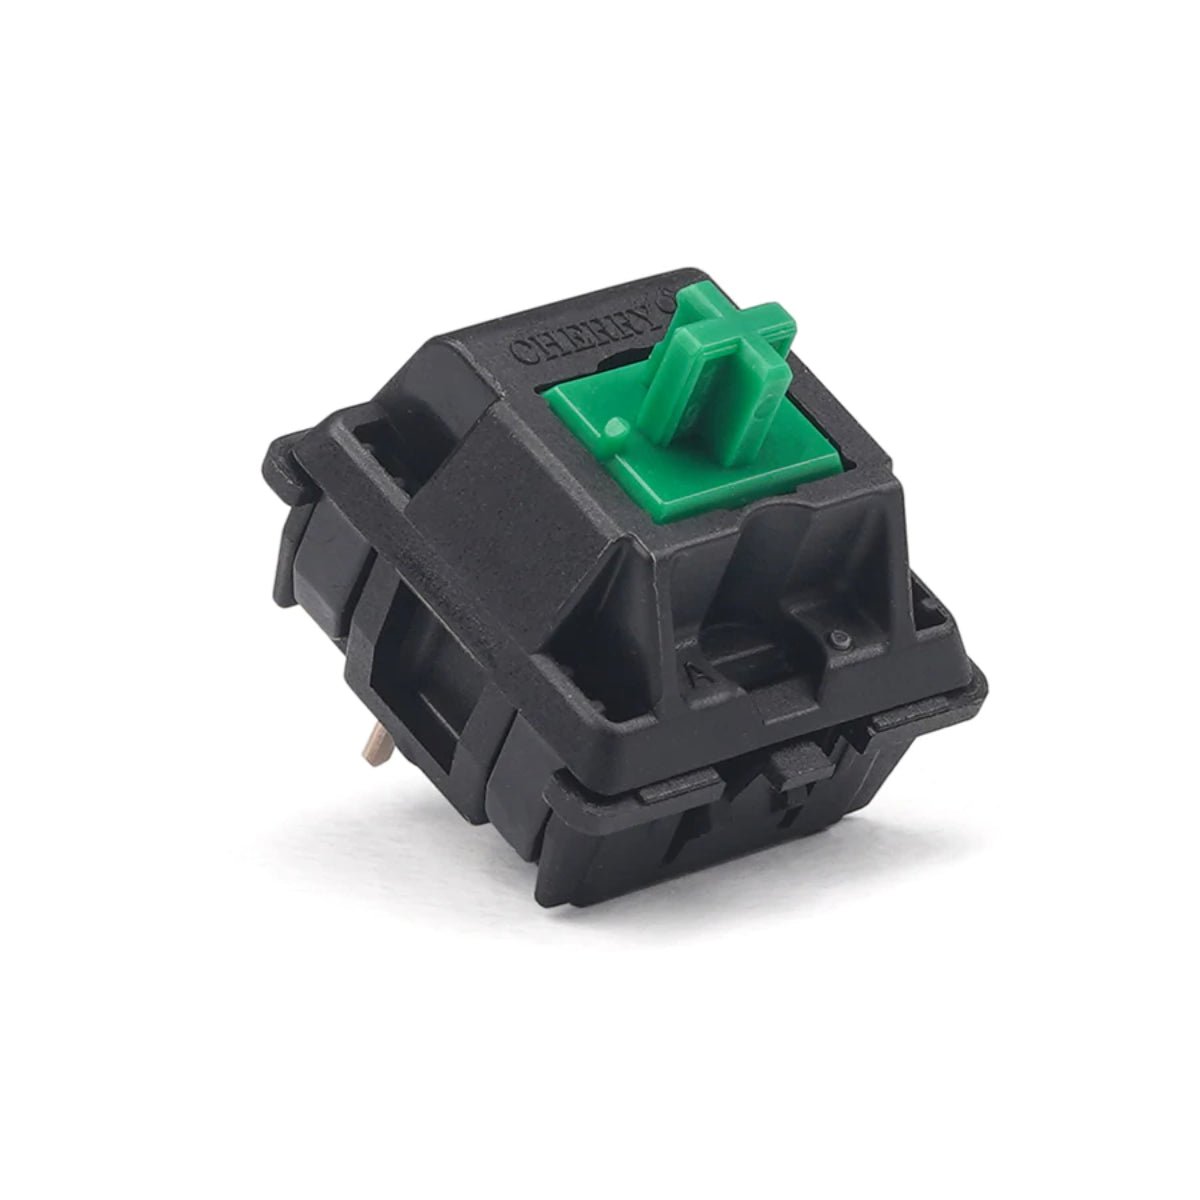 KBD Fans Cherry MX Hyperglide Switches - Green - Store 974 | ستور ٩٧٤